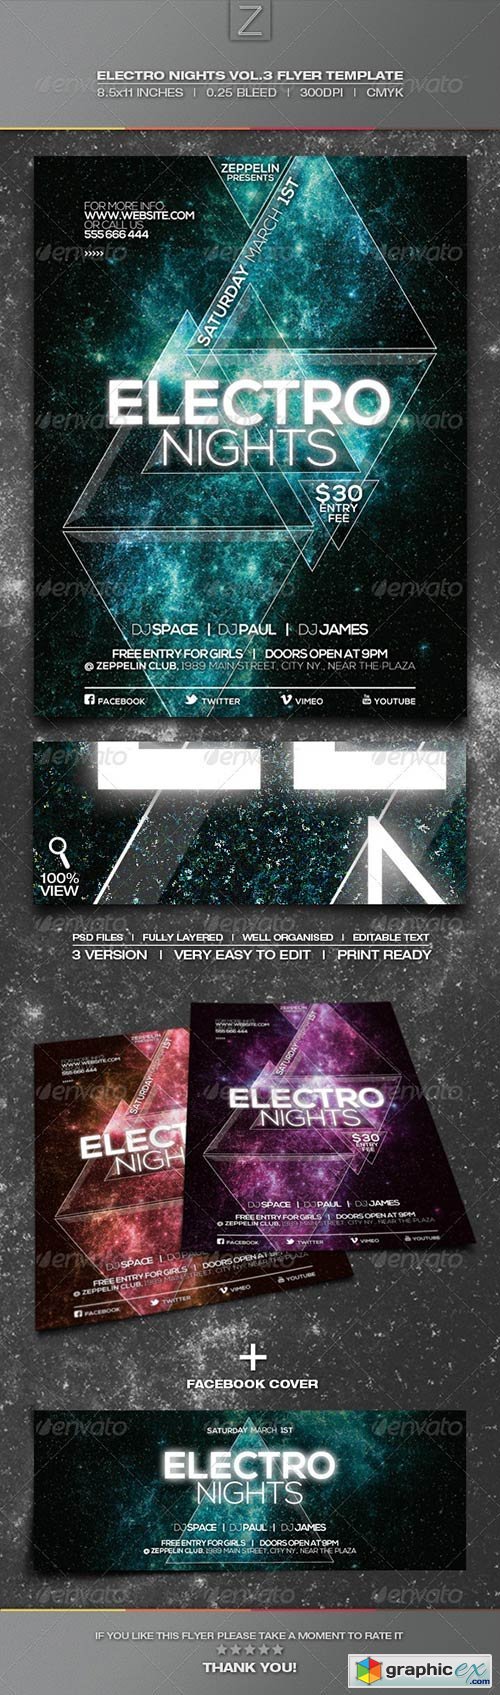 Electro Nights Vol.3 Flyer Template